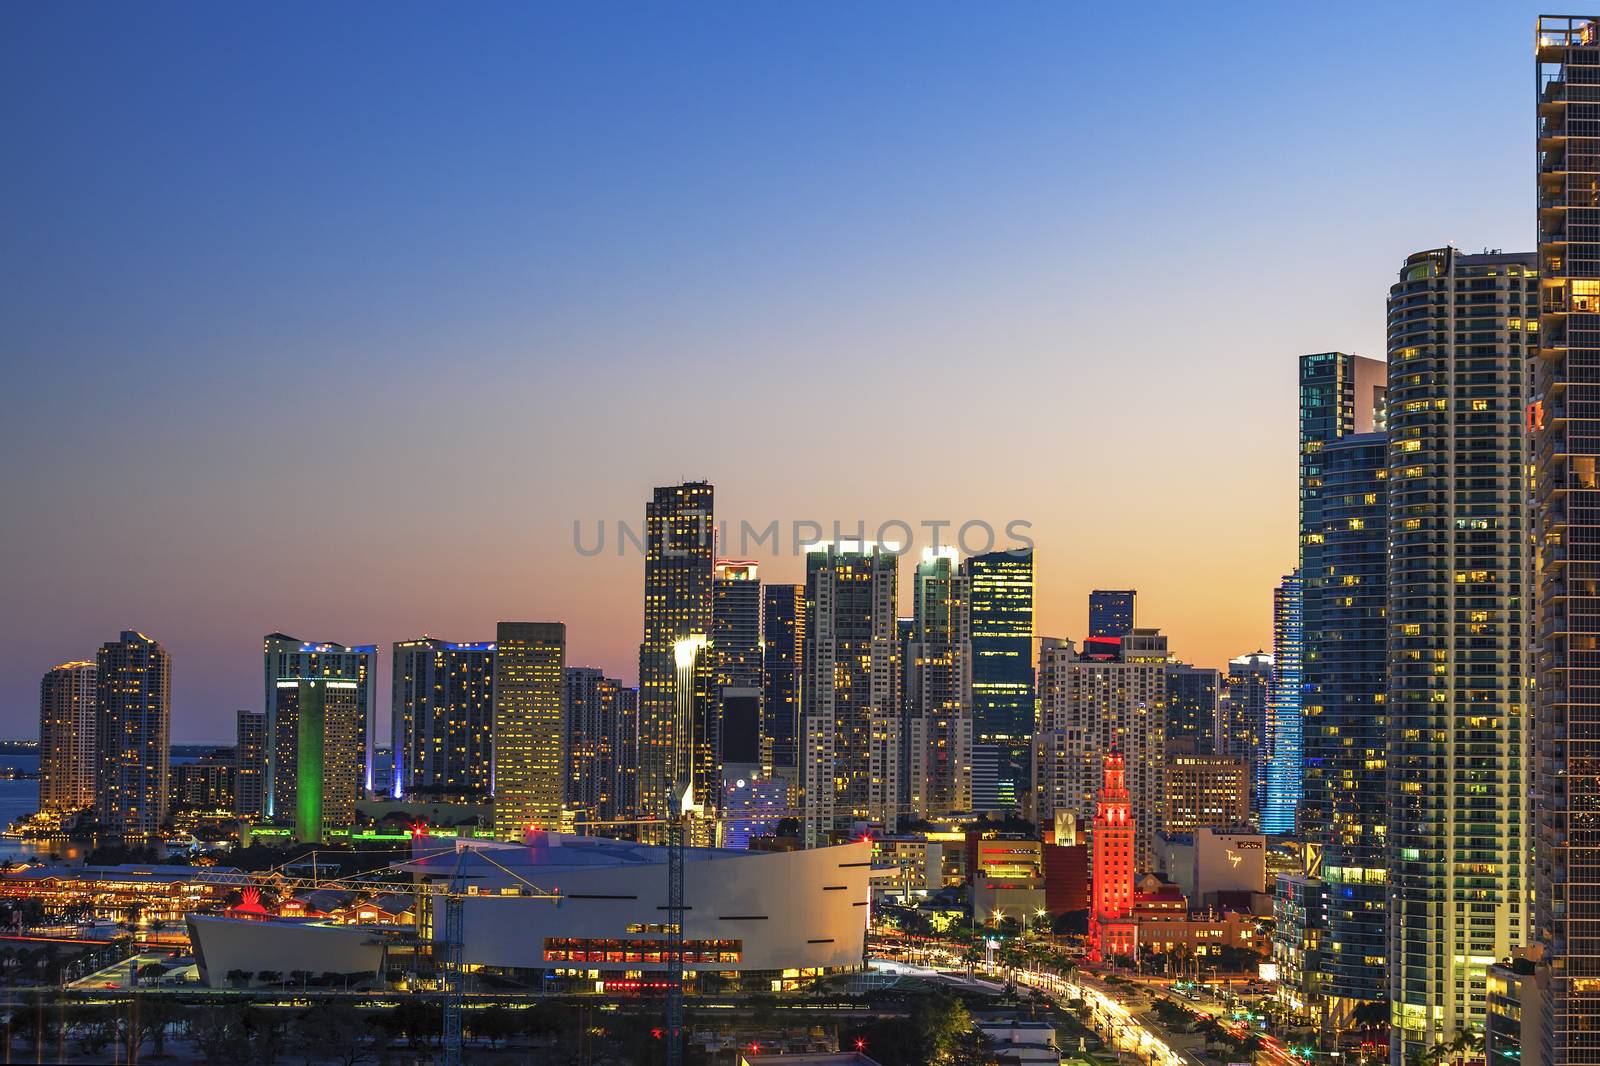 Horizontal view of Miami downtown at sunset by vwalakte